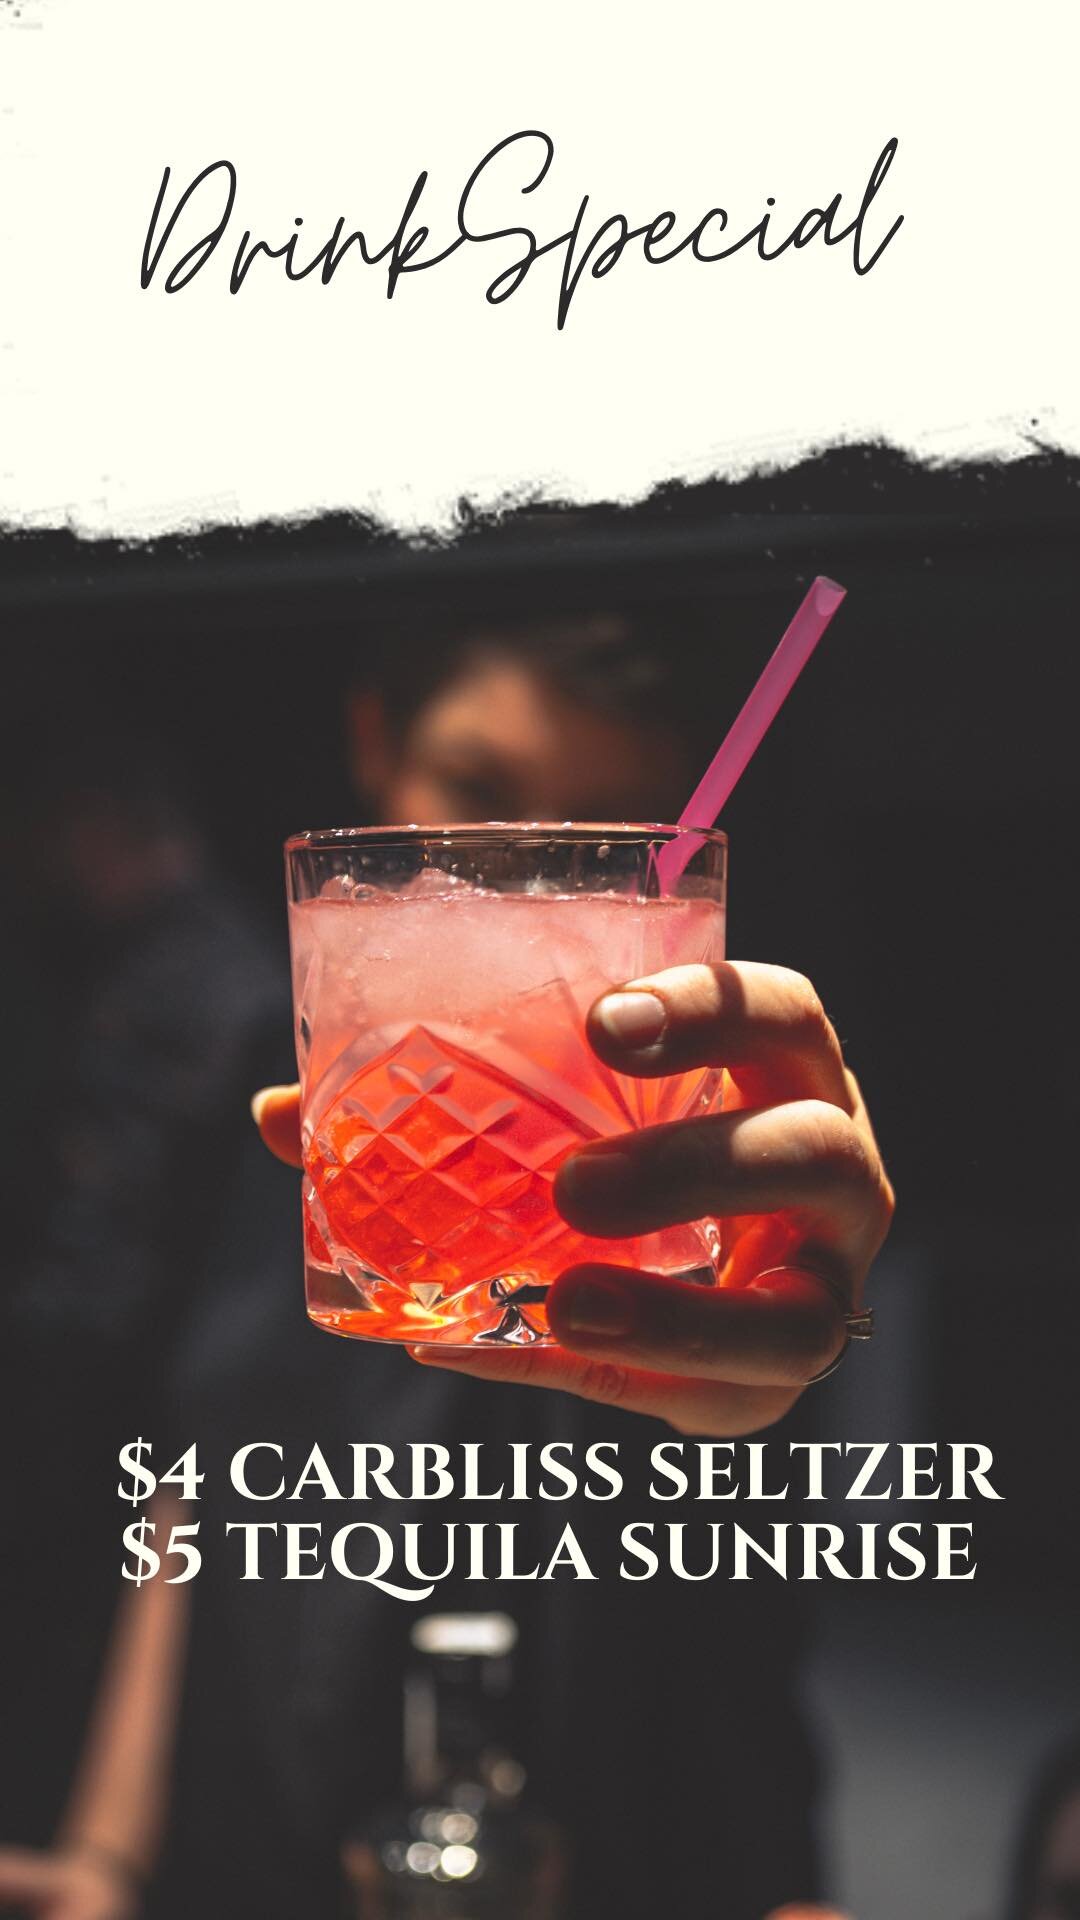 TequilaSunriseGate? More like TequilaSunriseGREAT!  In honor of my pal Gabriel's sticky situation last night, we're slingin' $5 Tequila Sunrises ALL NIGHT! Come raise a glass (without throwing it, please ) and support your local bar! #DrinkForGabriel